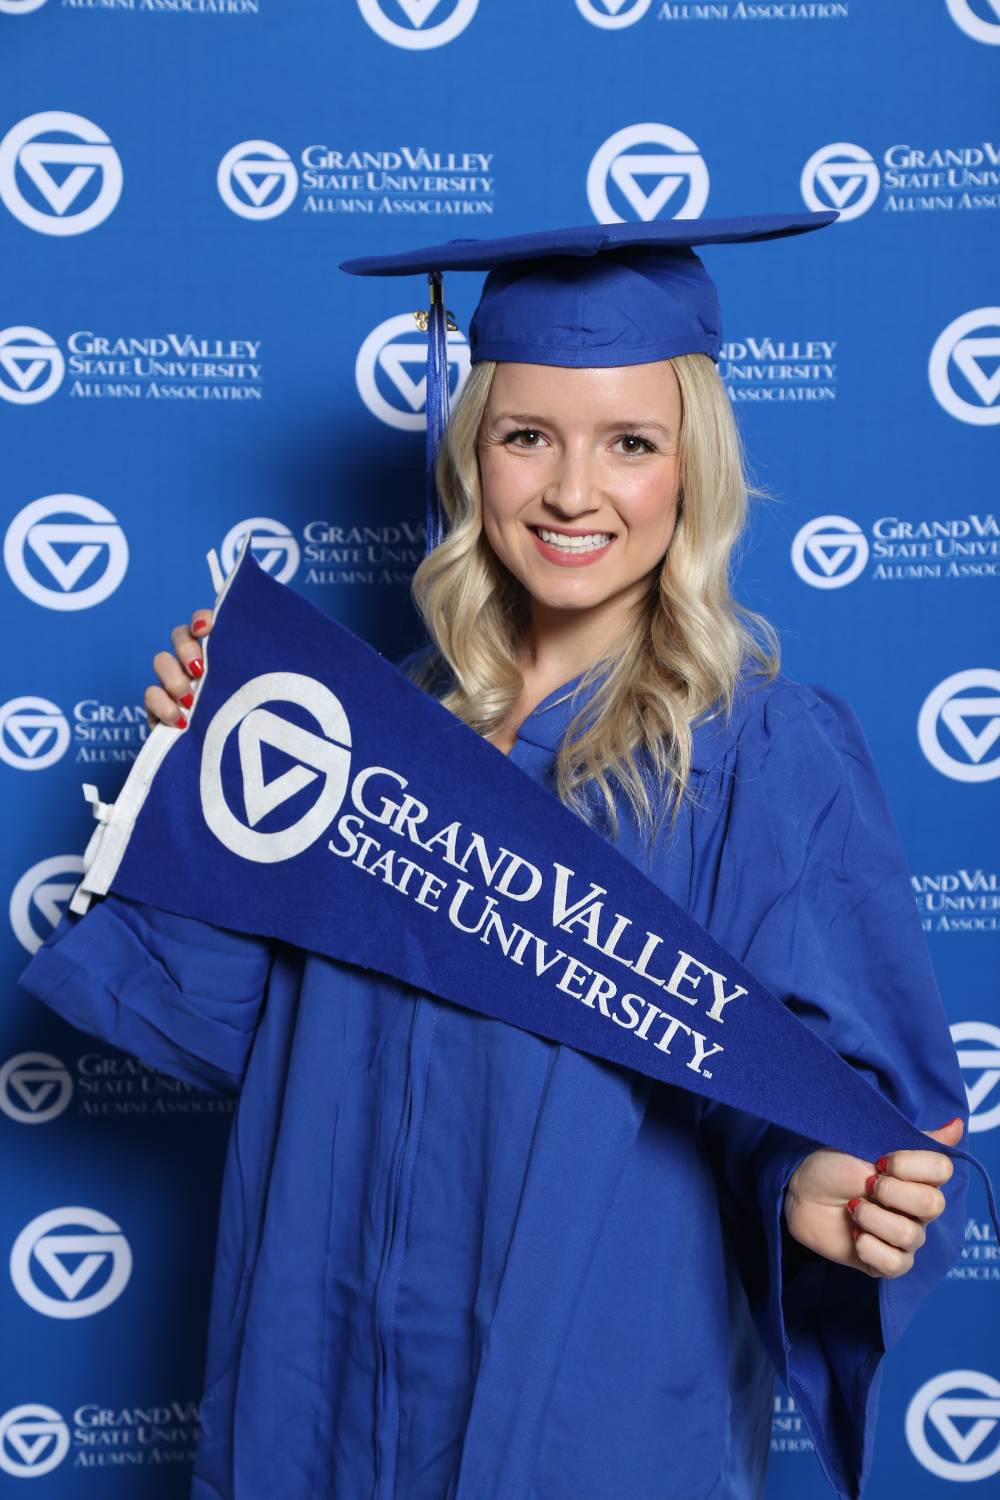 A future graduate poses with GV flag at Gradfest